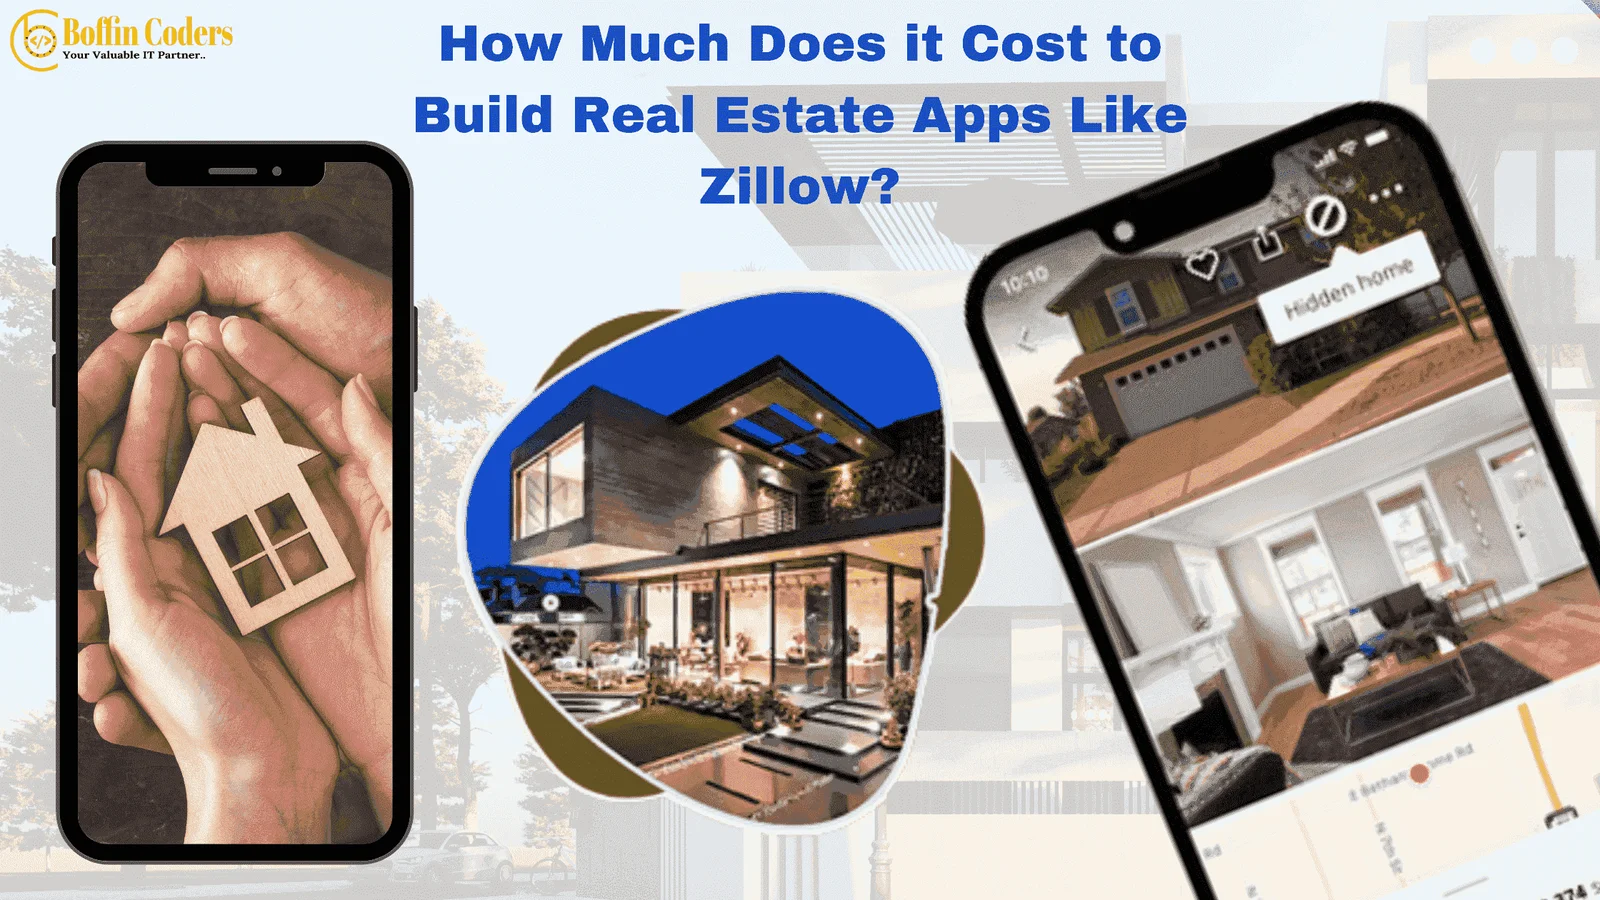 How Much Does it Cost to Build Real Estate Apps Like Zillow?